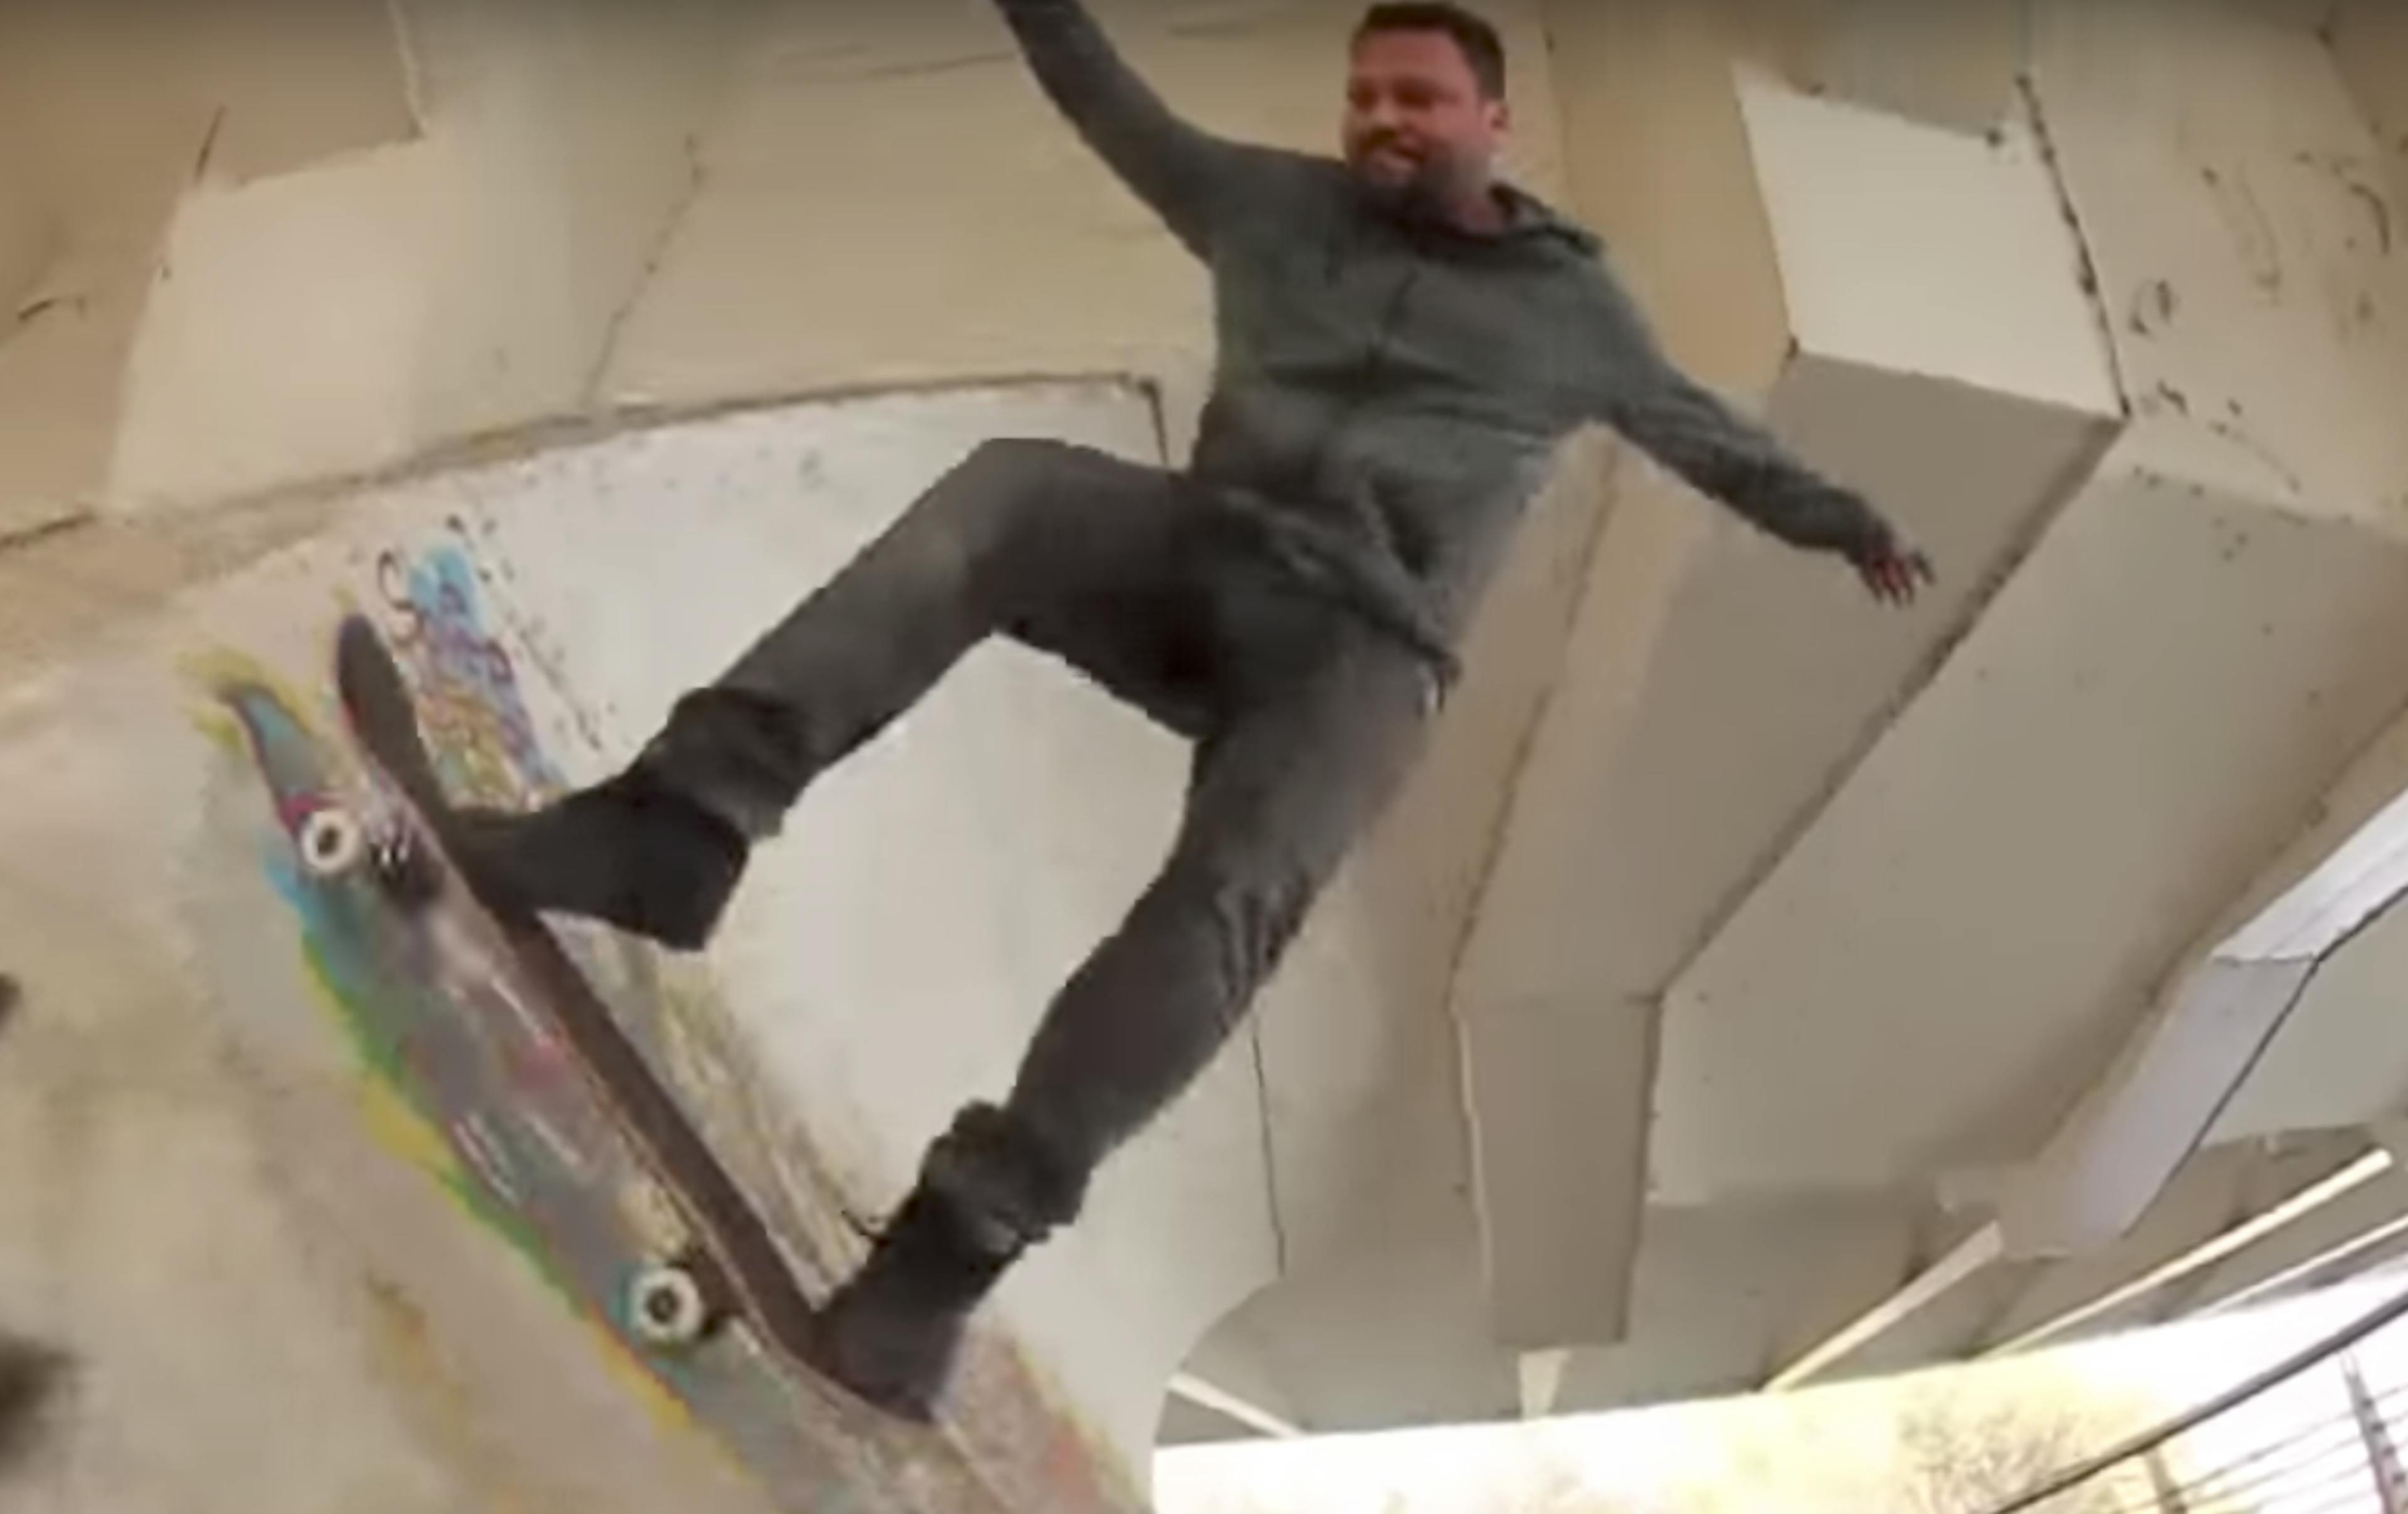 CKY Soundtrack First New Bam Margera Skate Footage In Years